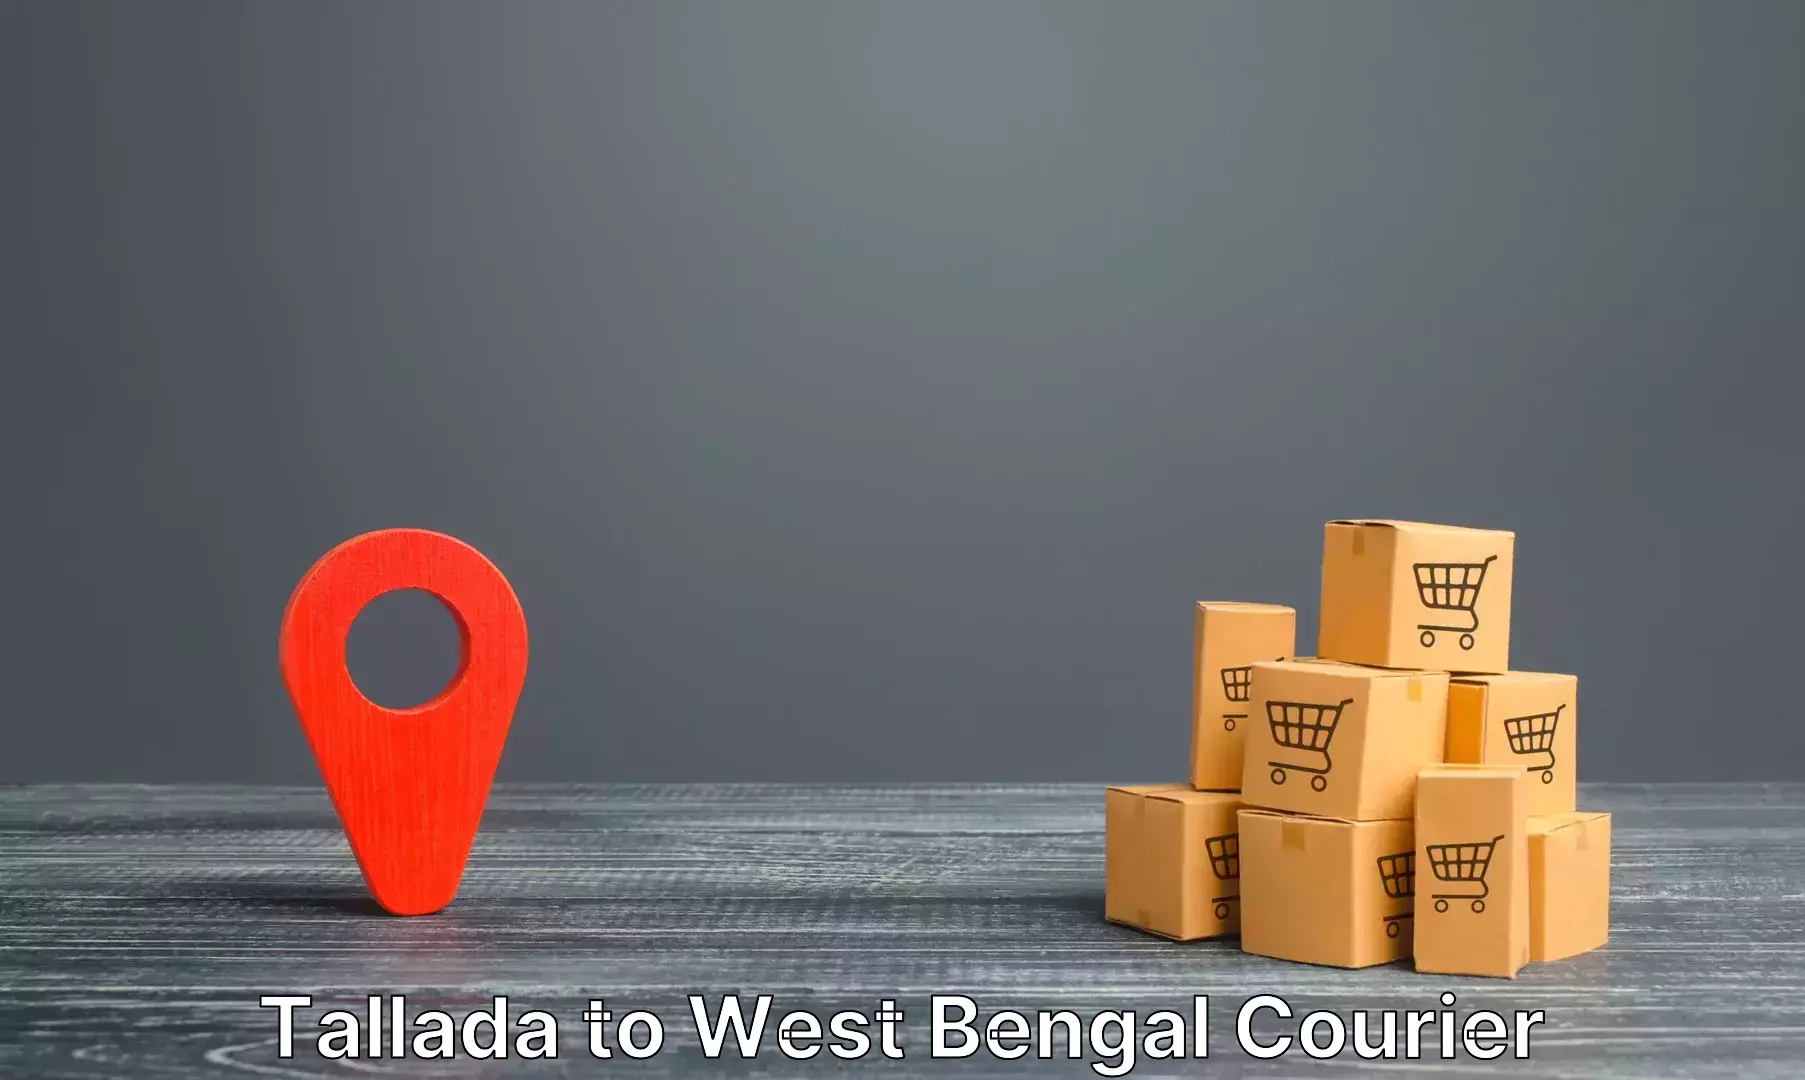 Luggage transport consultancy Tallada to West Bengal